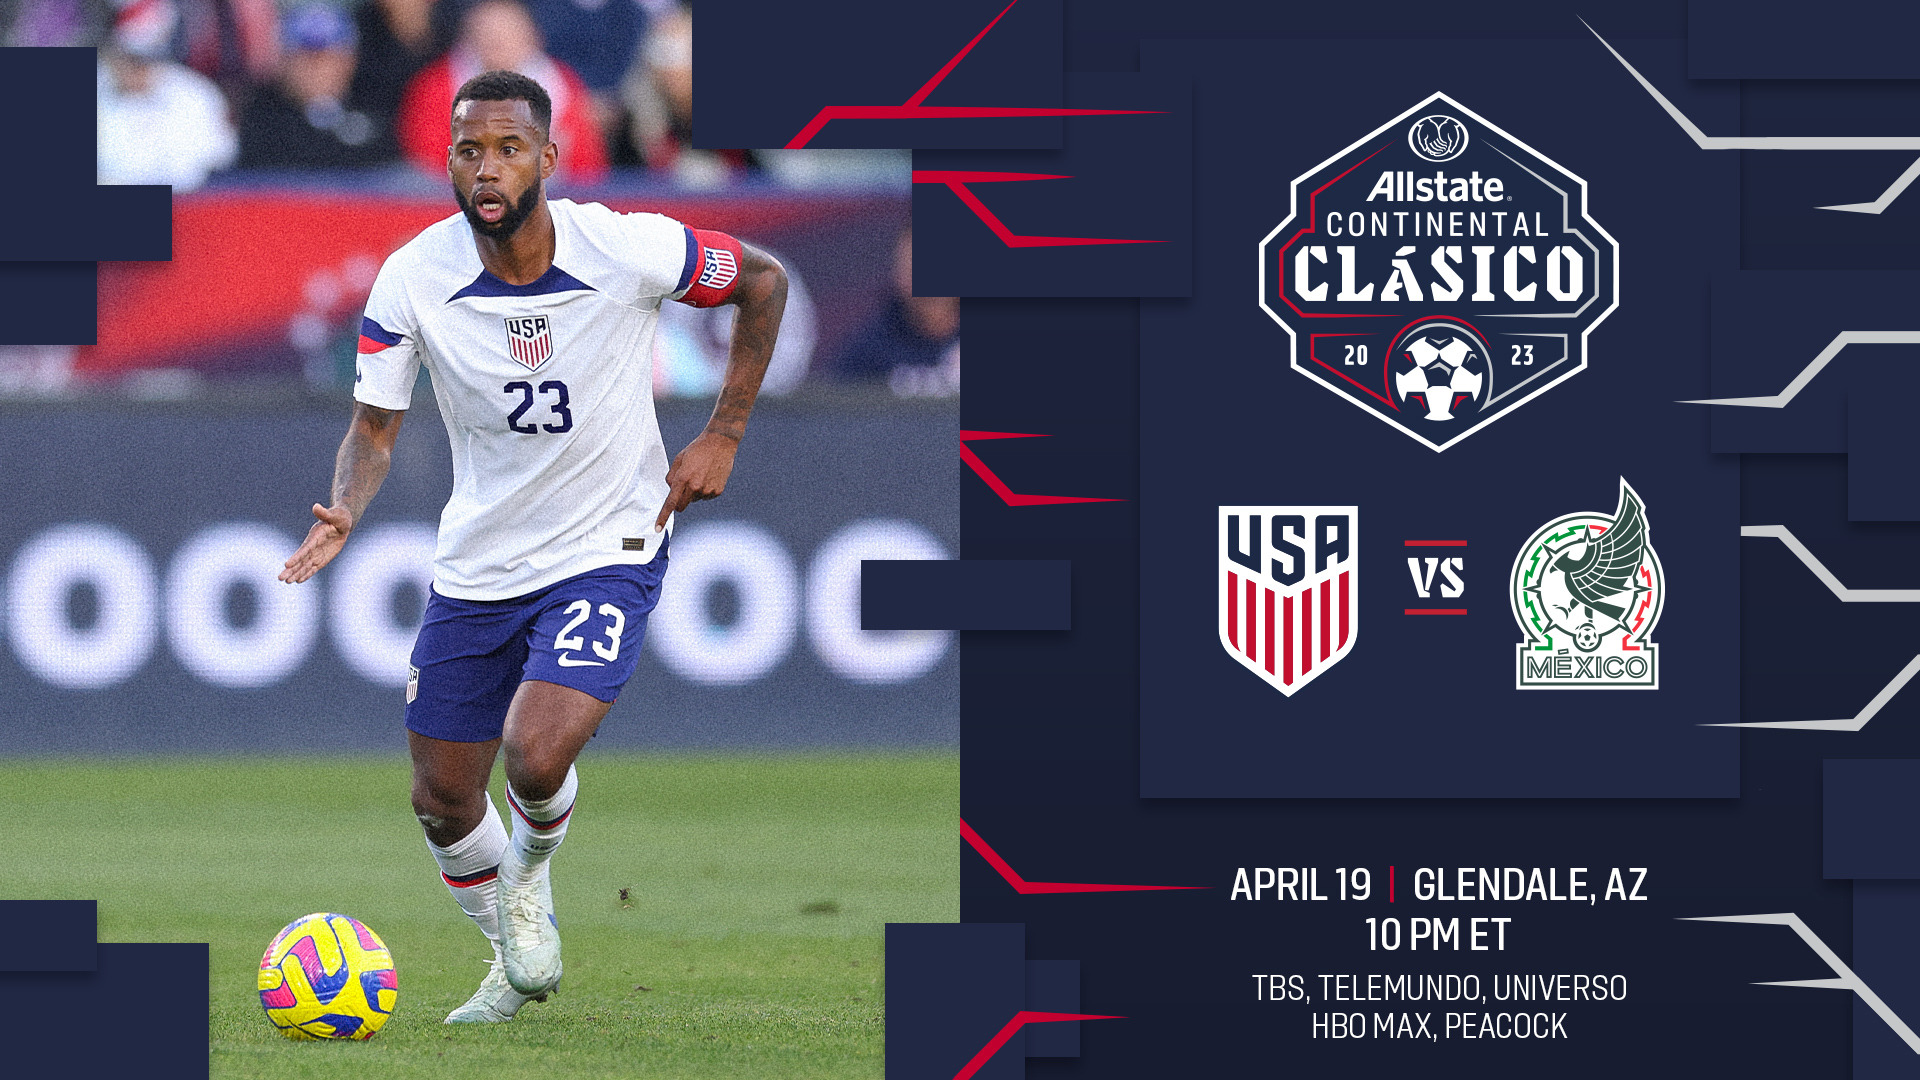 U.S. Men’s National Team Faces Mexico In Inaugural Allstate Continental Clásico On April 19 In Glendale, Arizona | U.S. Soccer Official Website